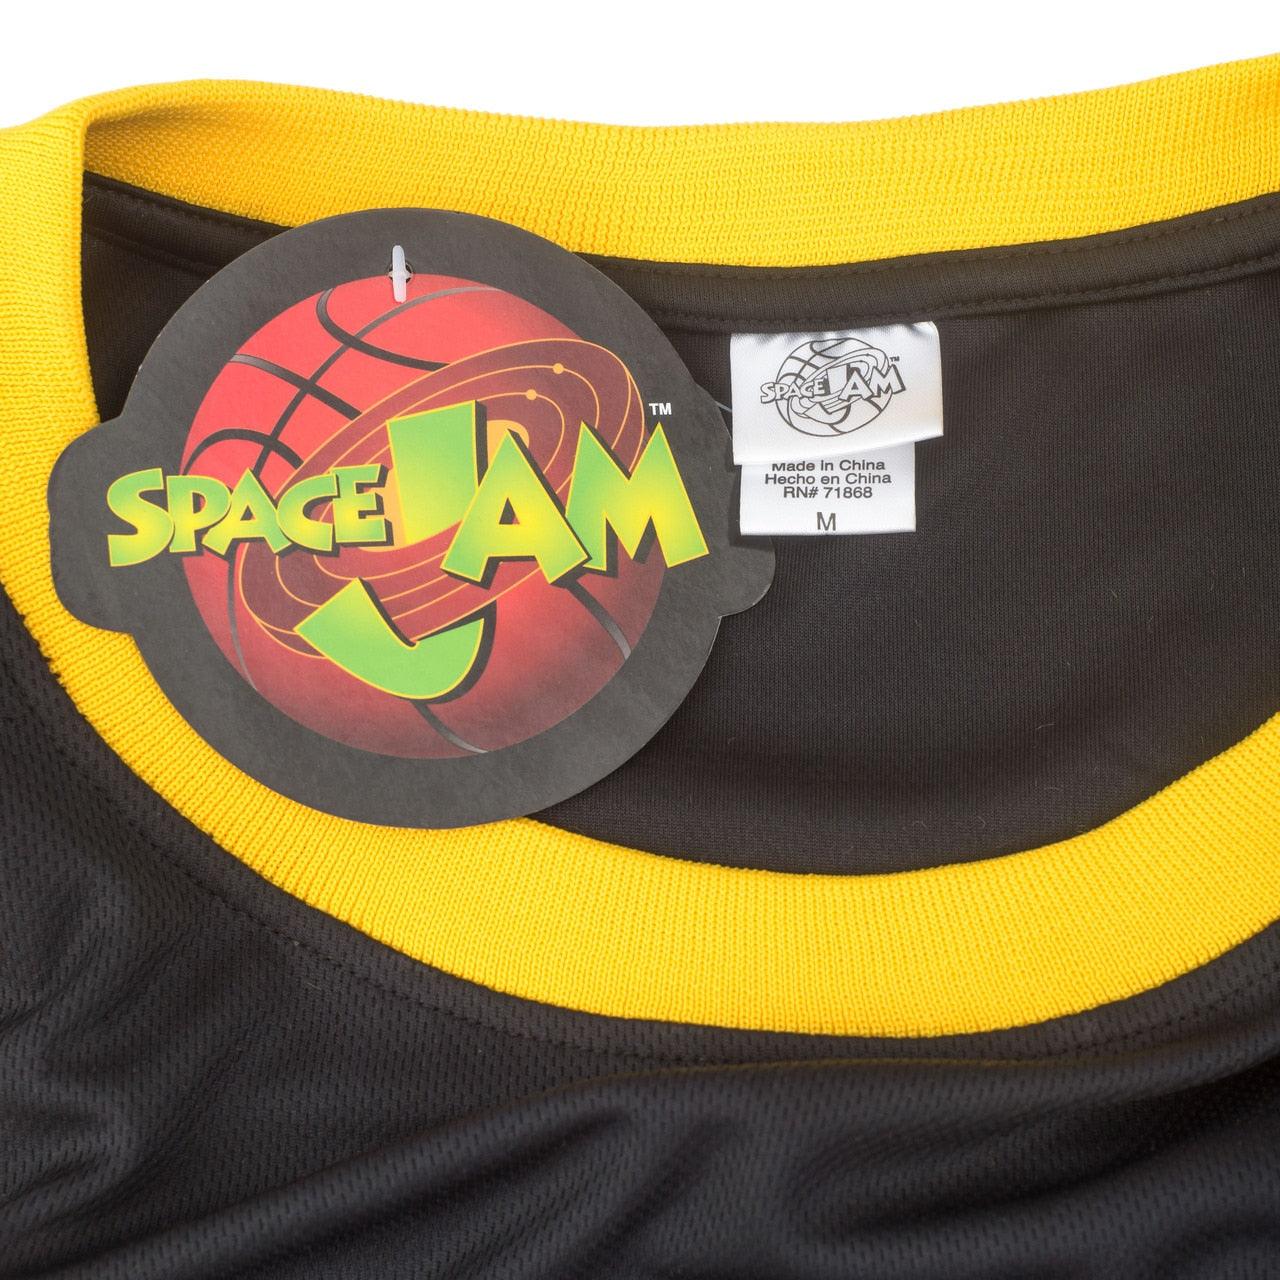 90s Basketball Jersey Shirt for Party, Space Movie #1#10 Jersey for  Halloween,Classic Outfit for Party 